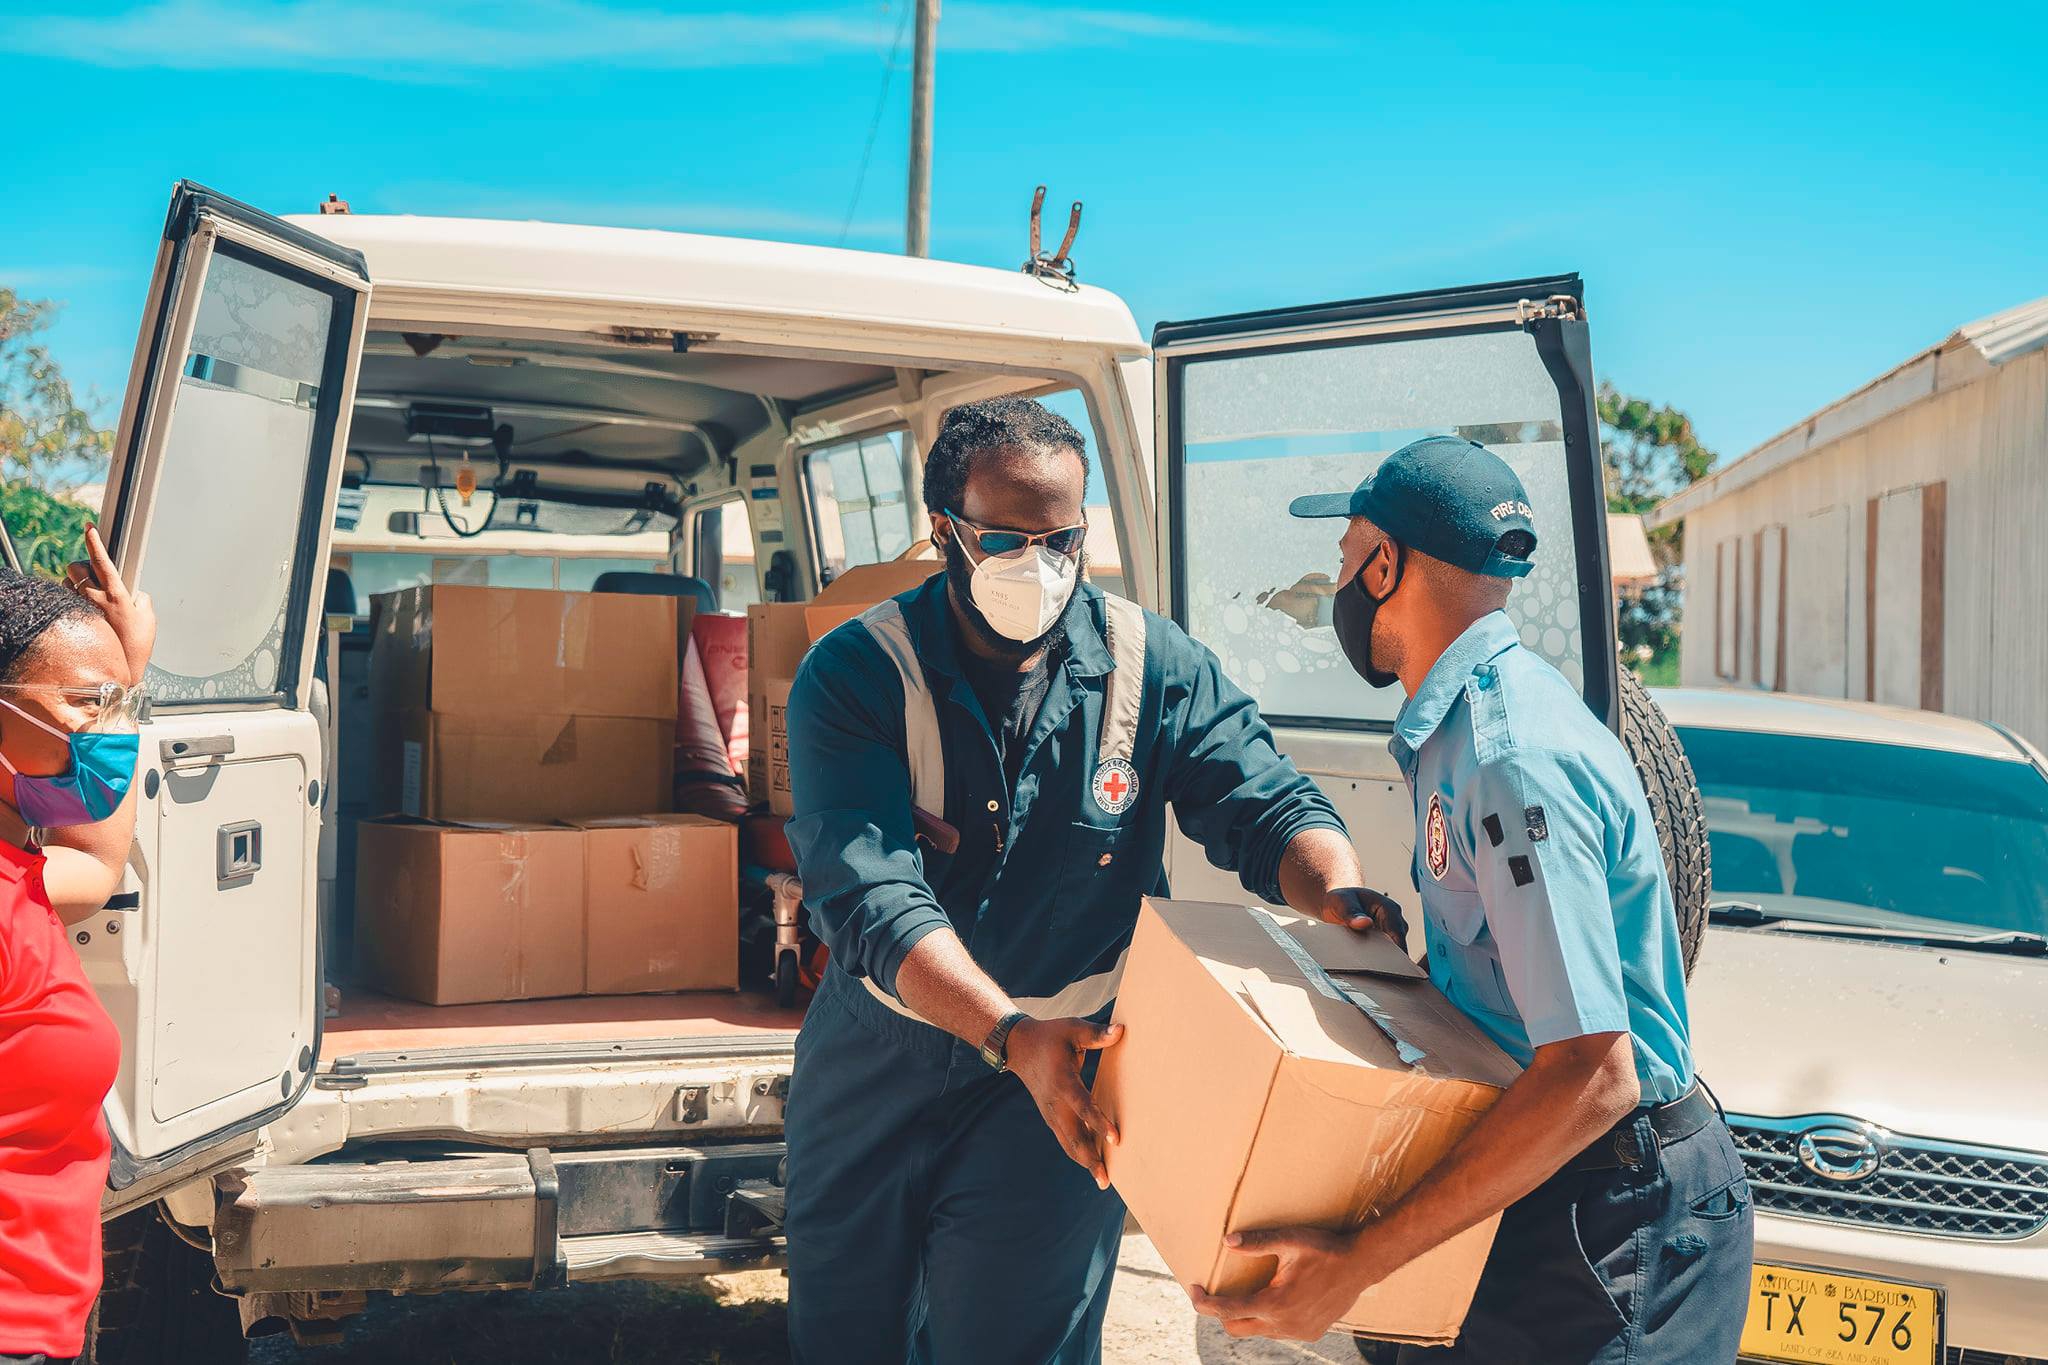 The Antigua and Barbuda Red Cross recently donated personal protective equipment (PPE) such as KN95 masks, face shields, and medical gowns, as well as disinfectants to the Antigua & Barbuda Fire Department to help them in their COVID-19 response.